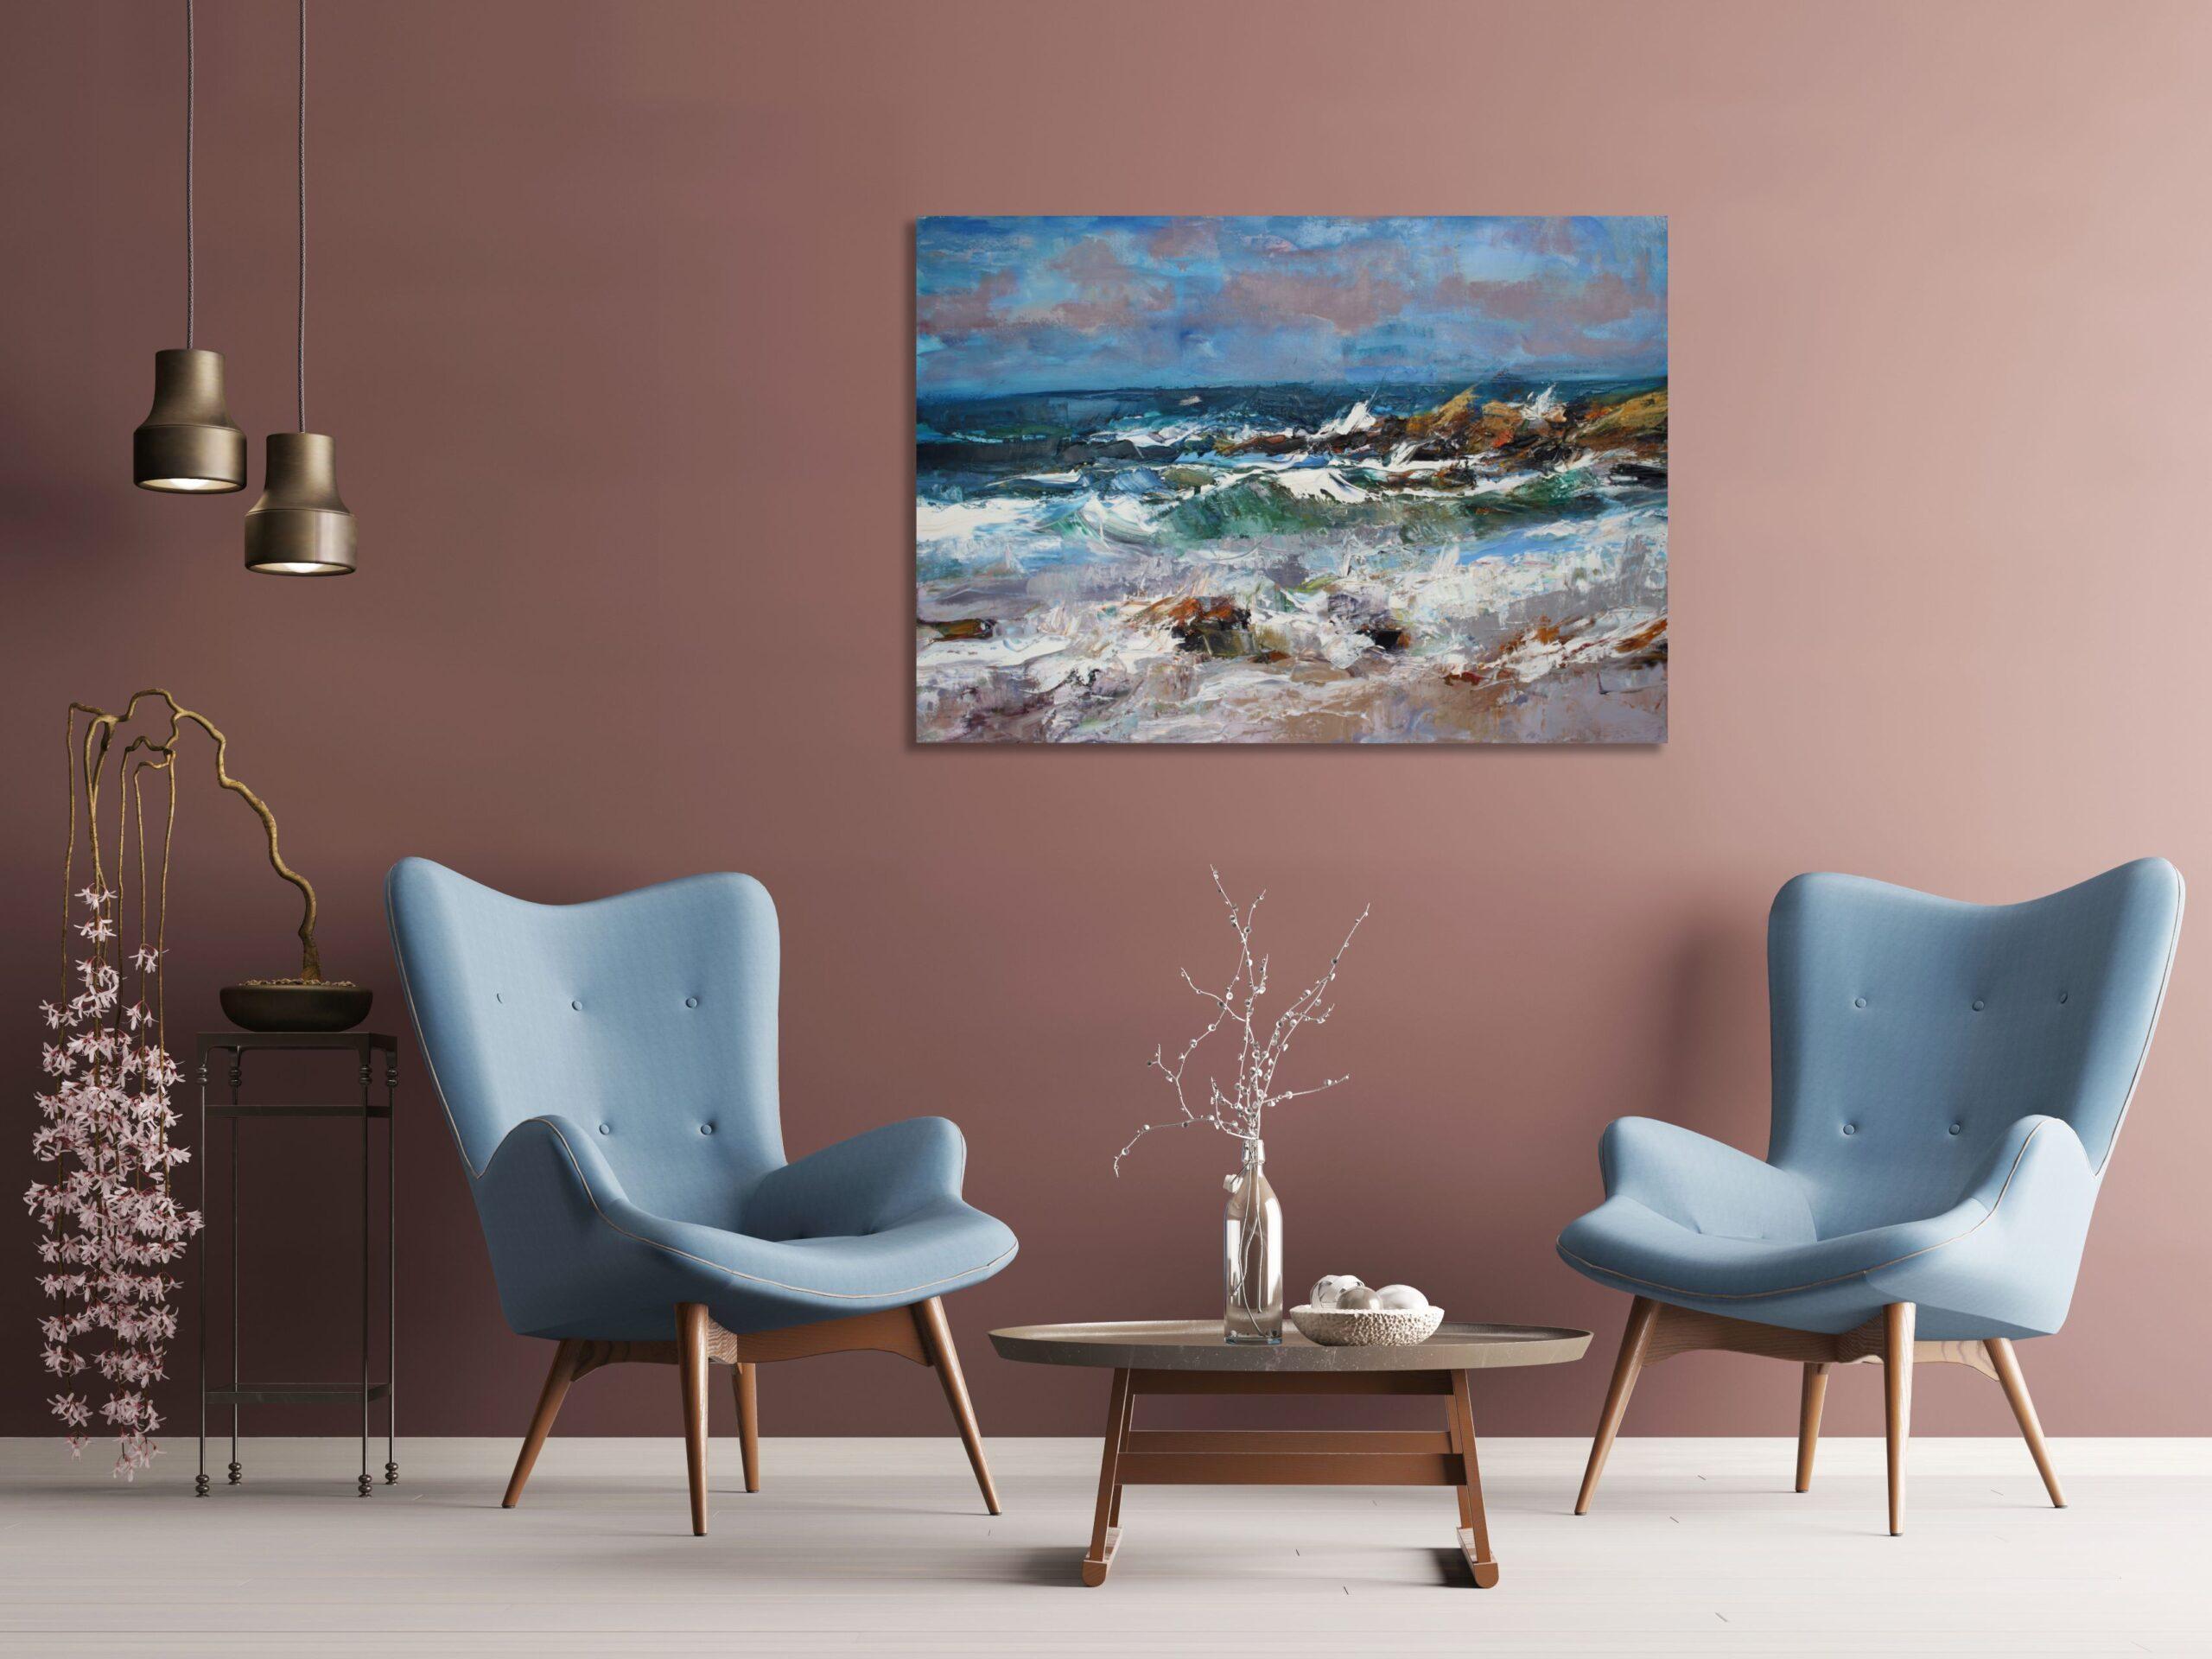 Crashing Waves Hopeman Beach is a unique oil on canvas painting by contemporary artist Jonathan Shearer, dimensions are 70 × 100 × 3.5 cm (27.6 × 39.4 × 1.4 in).
The artwork is signed, sold unframed and comes with a certificate of